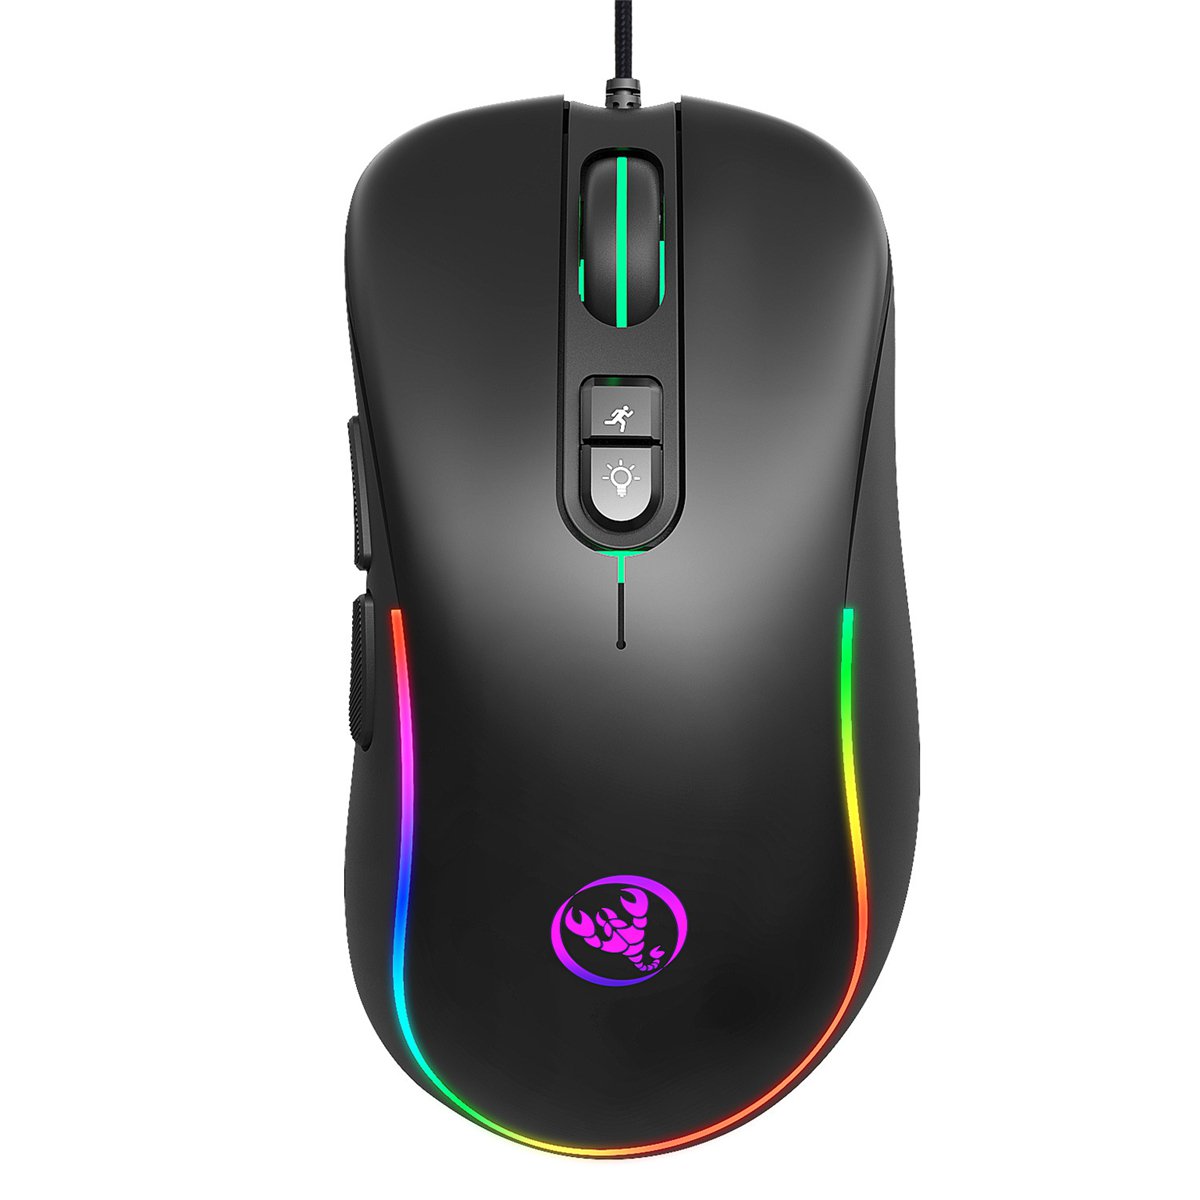 HXSJ J300 Wired Gaming Mouse 7 Button Macro Programming Mouse 6400DPI Colorful RGB Backlight USB Wir